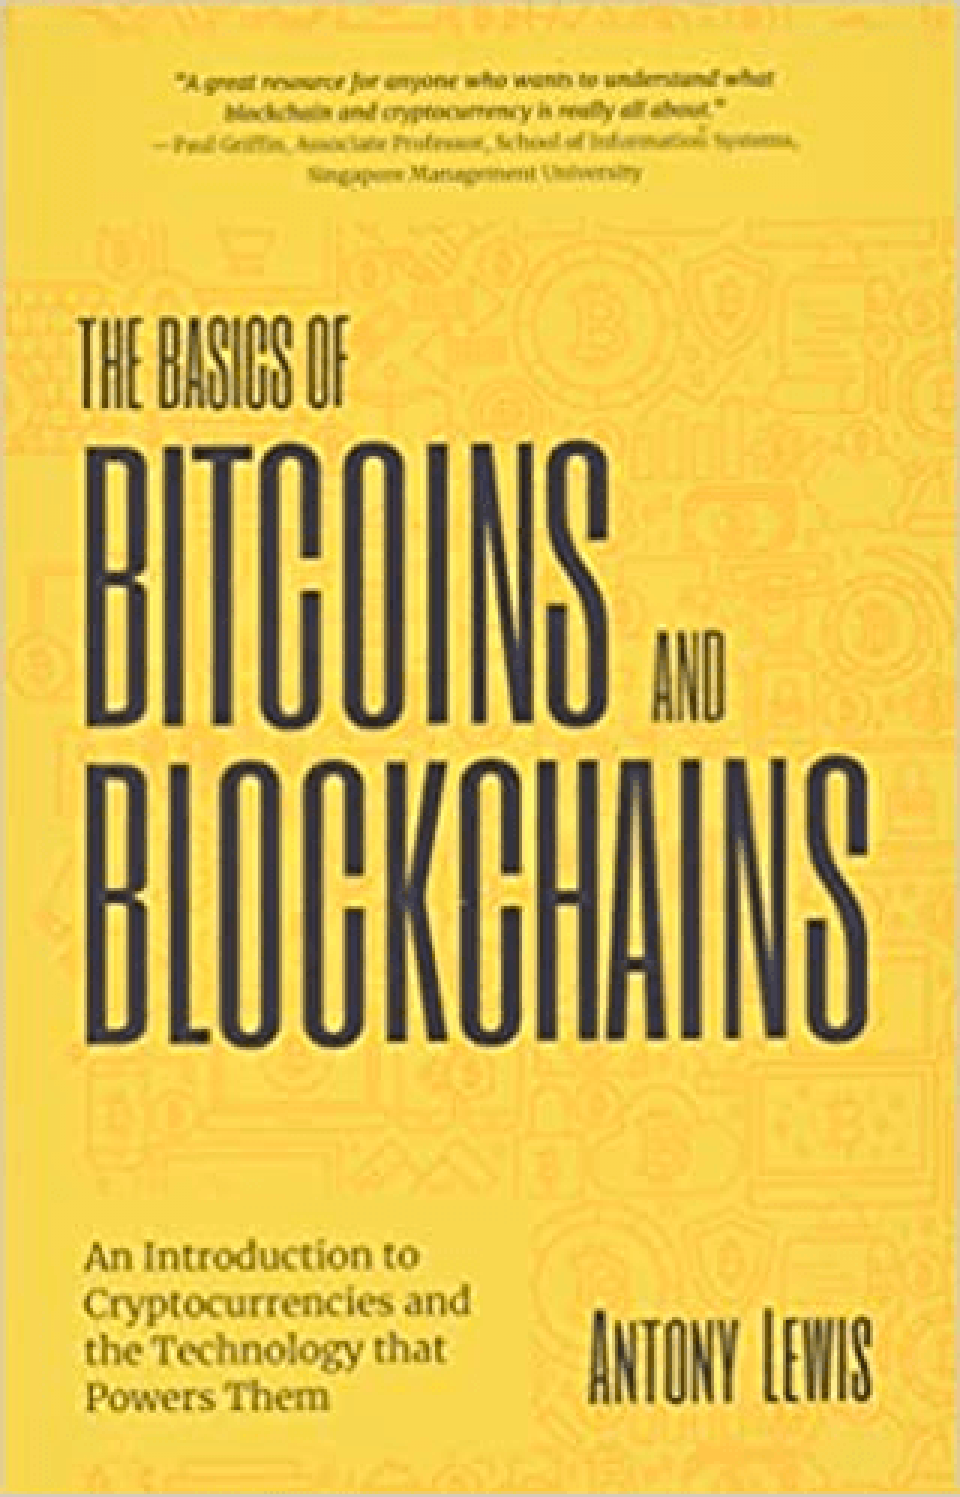 Front cover of the Basics of Bitcoins and Blockchains. 